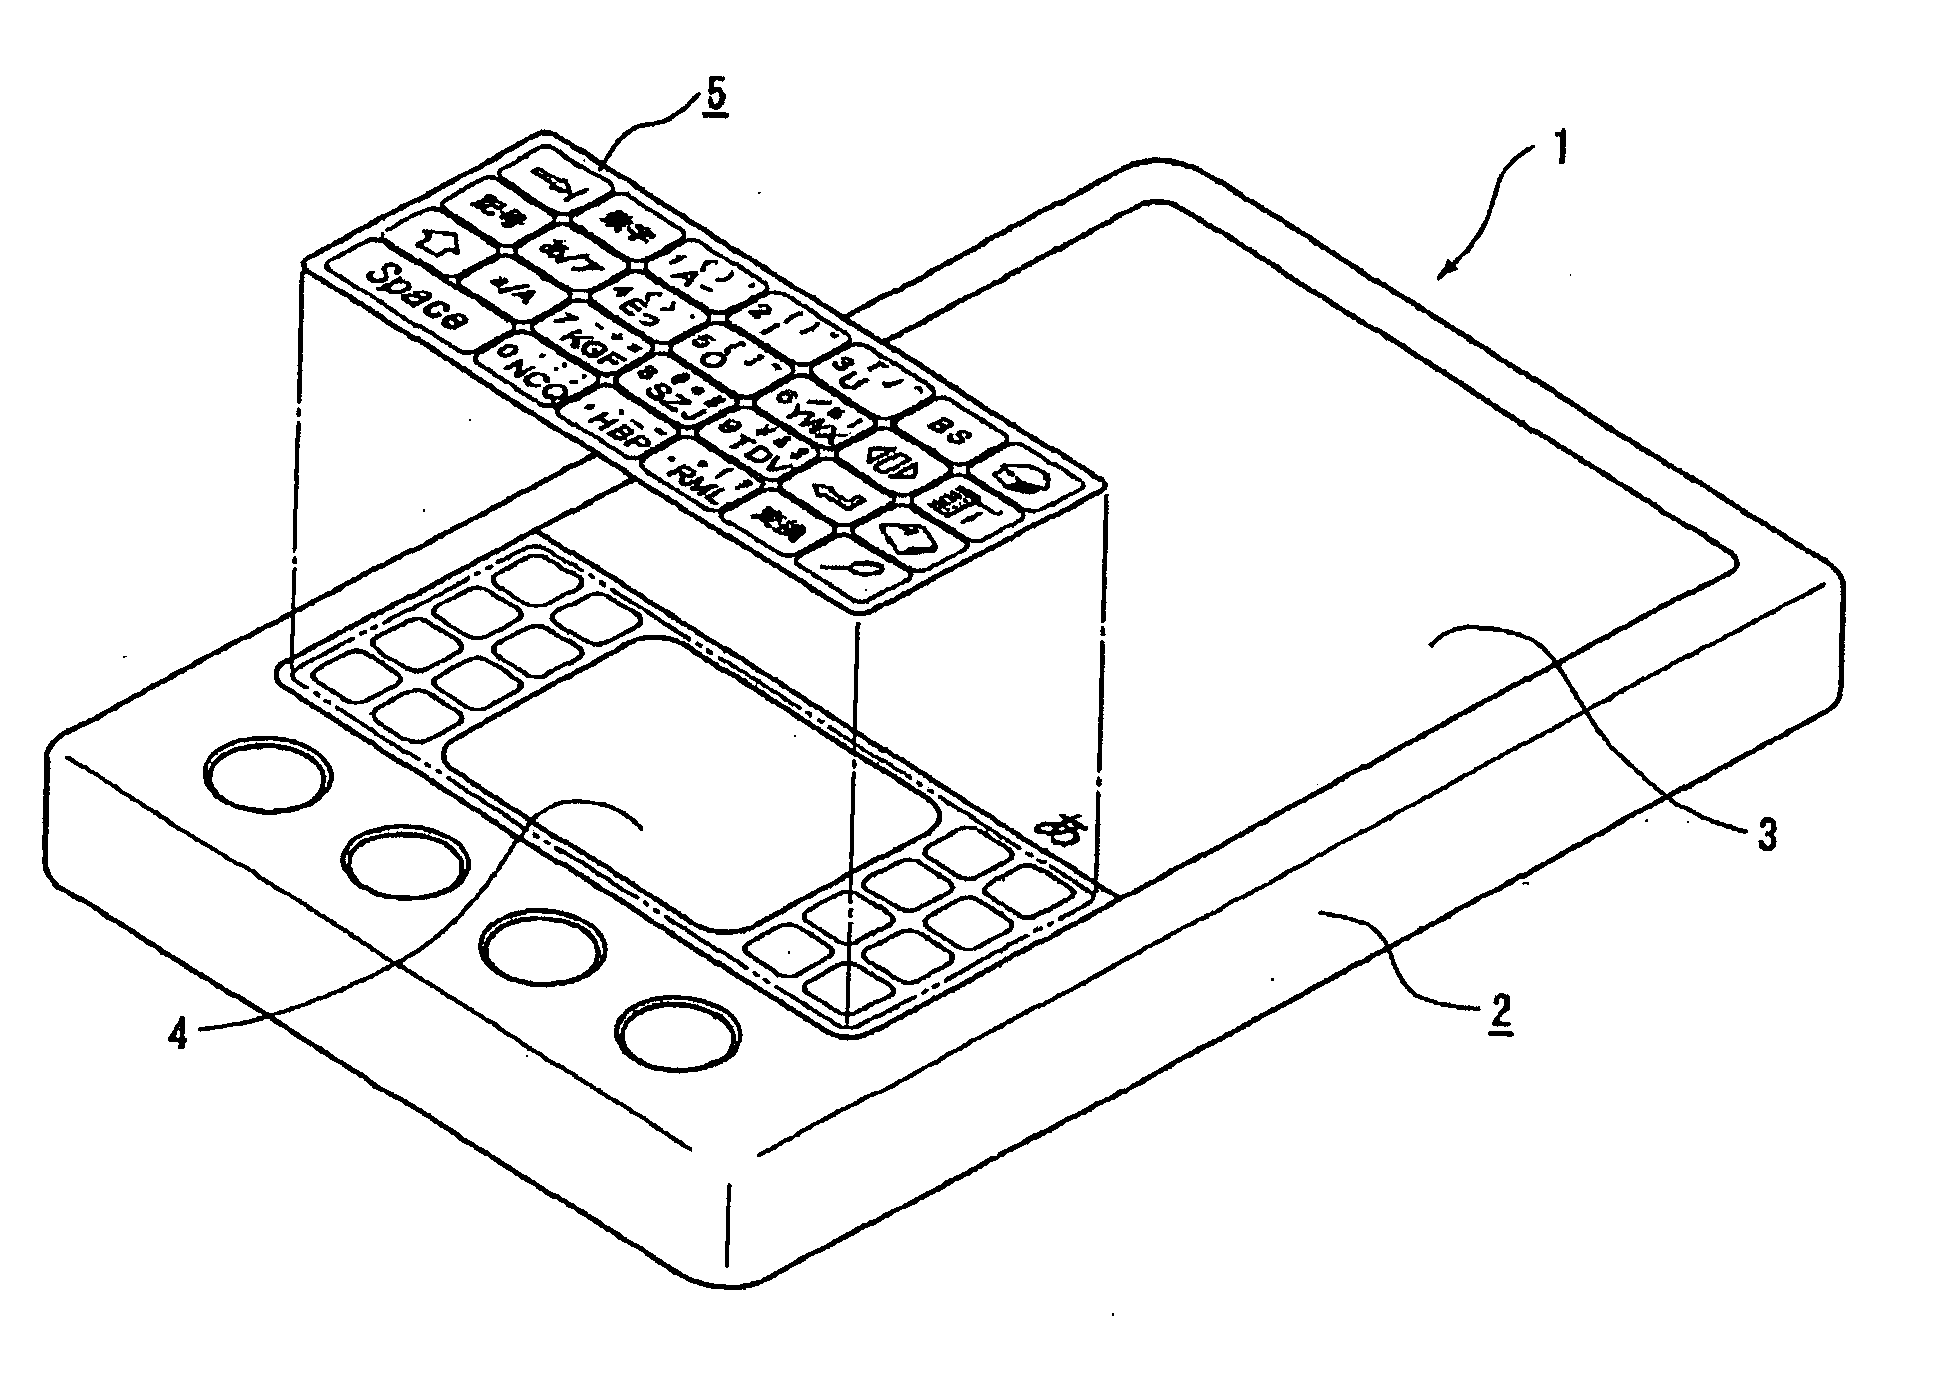 Touch-type key input apparatus